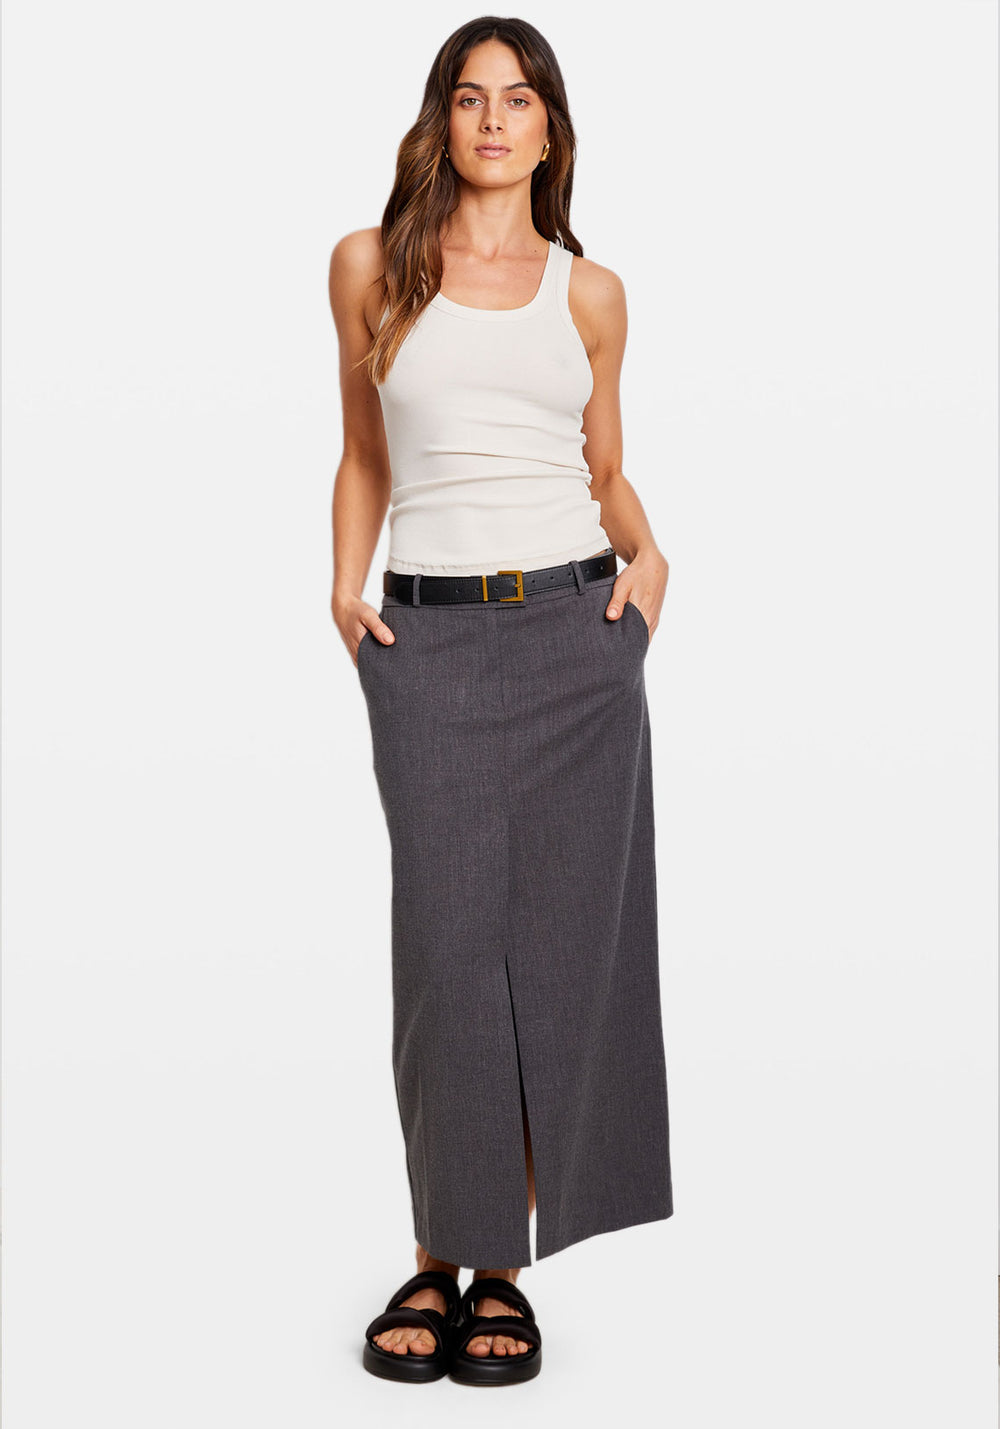 LOW RISE TAILORED MAXI SKIRT GREY